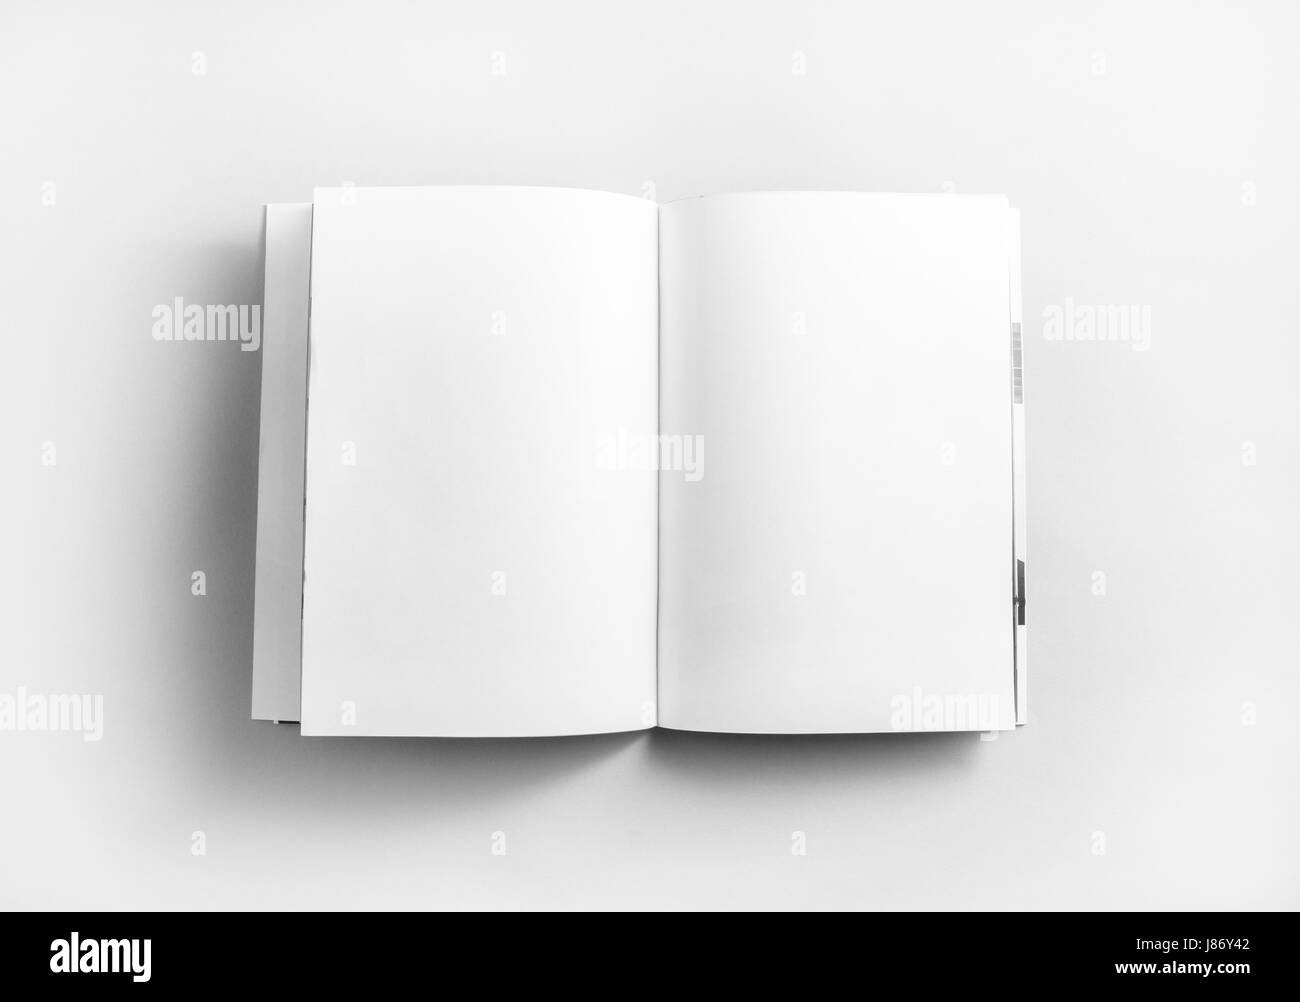 Blank open book, brochure or magazine on paper background. Mock-up for graphic designers portfolios. Responsive design mockup. Top view. Stock Photo